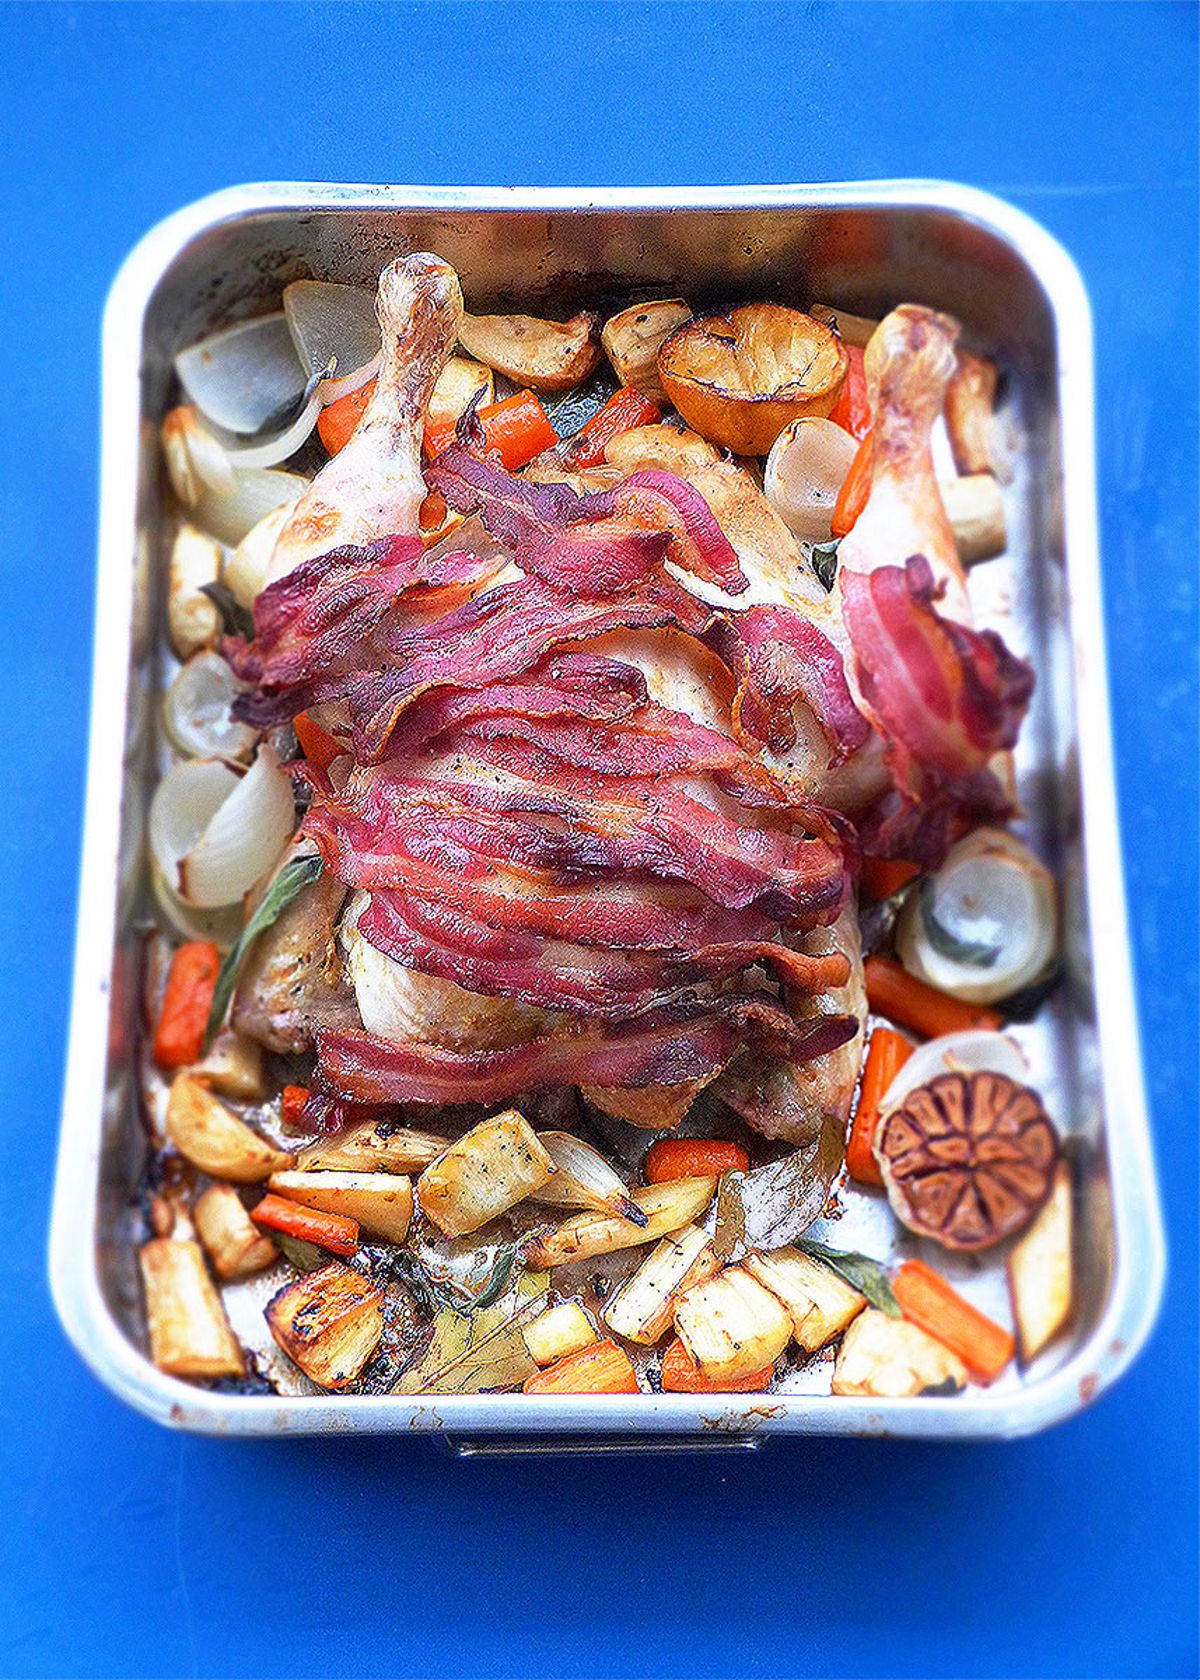 The Christmas Two-Tin Traybake Feast: Roast Chicken with Bacon, Parsnips and Carrots, Roast Potatoes, Pigs in Blankets, Stuffing and Crispy Garlic Sprouts